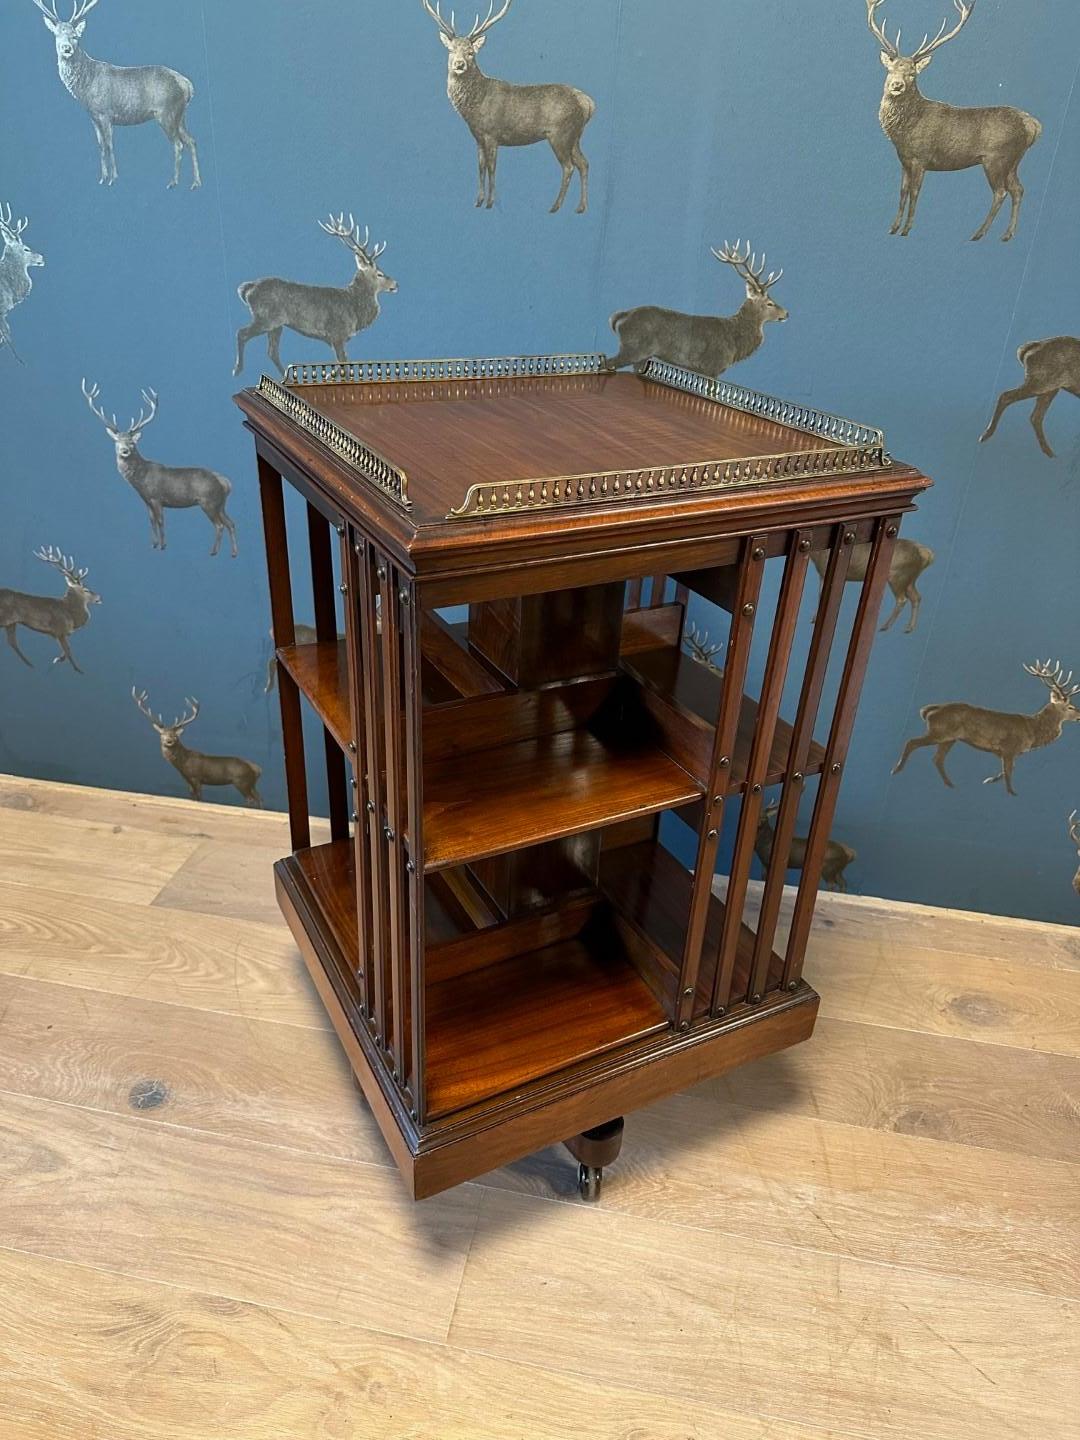 Beautiful antique book mill, completely solid mahogany. The fencing on top is special. Beautiful warm color, top quality and cast iron base. It was made by the famous 19th century English furniture manufacturer Maple & Co. 

Size: 49cm x 49cm x